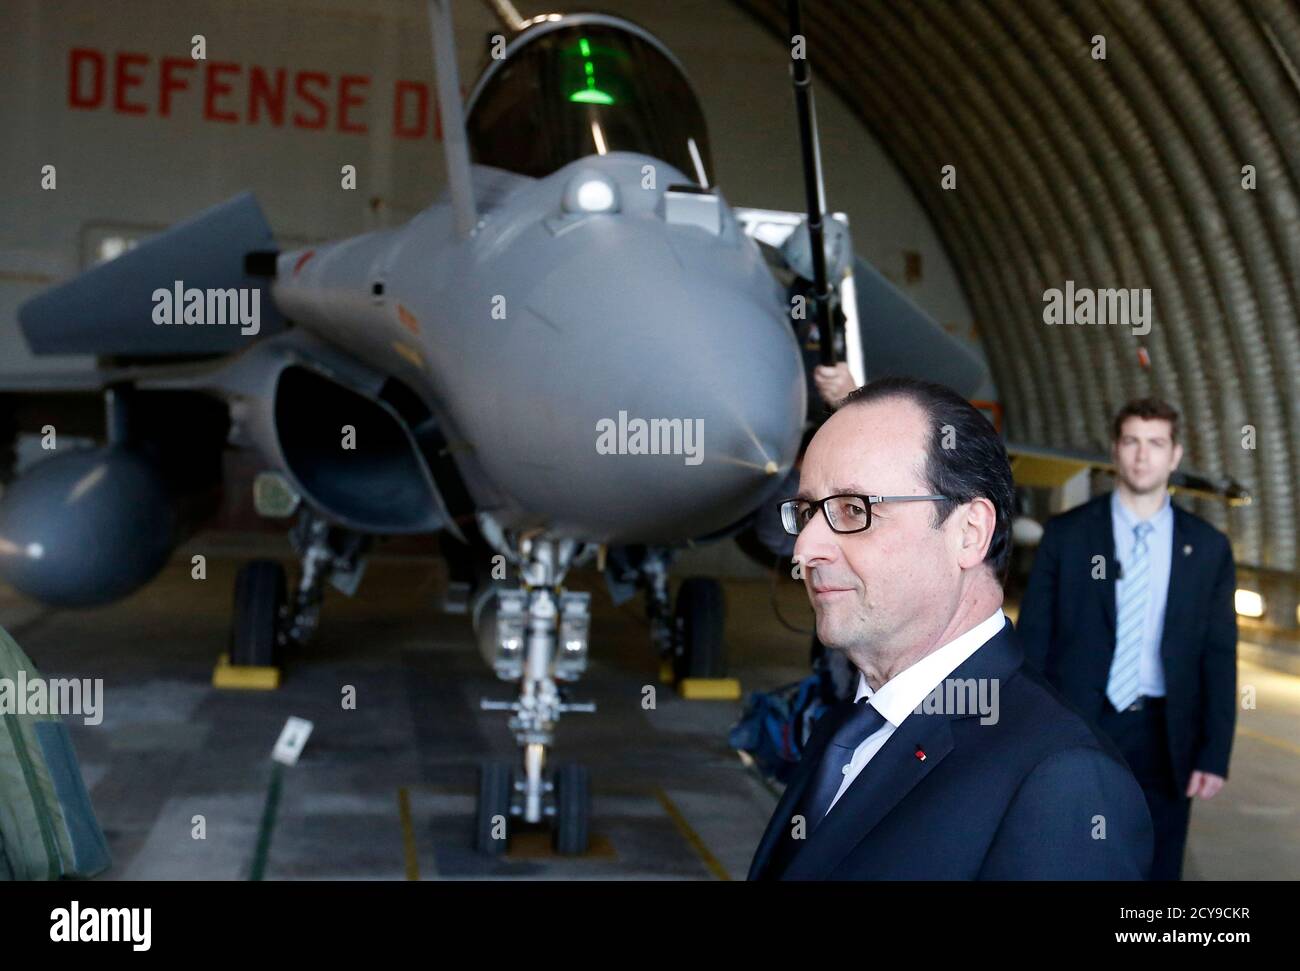 French President Francois Hollande speaks to pilots (not pictured) during a visit about nuclear deterrence and a strategic Air Force at the military base in Istres, southern France February 19, 2015.   REUTERS/Guillaume Horcajuelo/Pool   (FRANCE - Tags: POLITICS MILITARY) Stock Photo